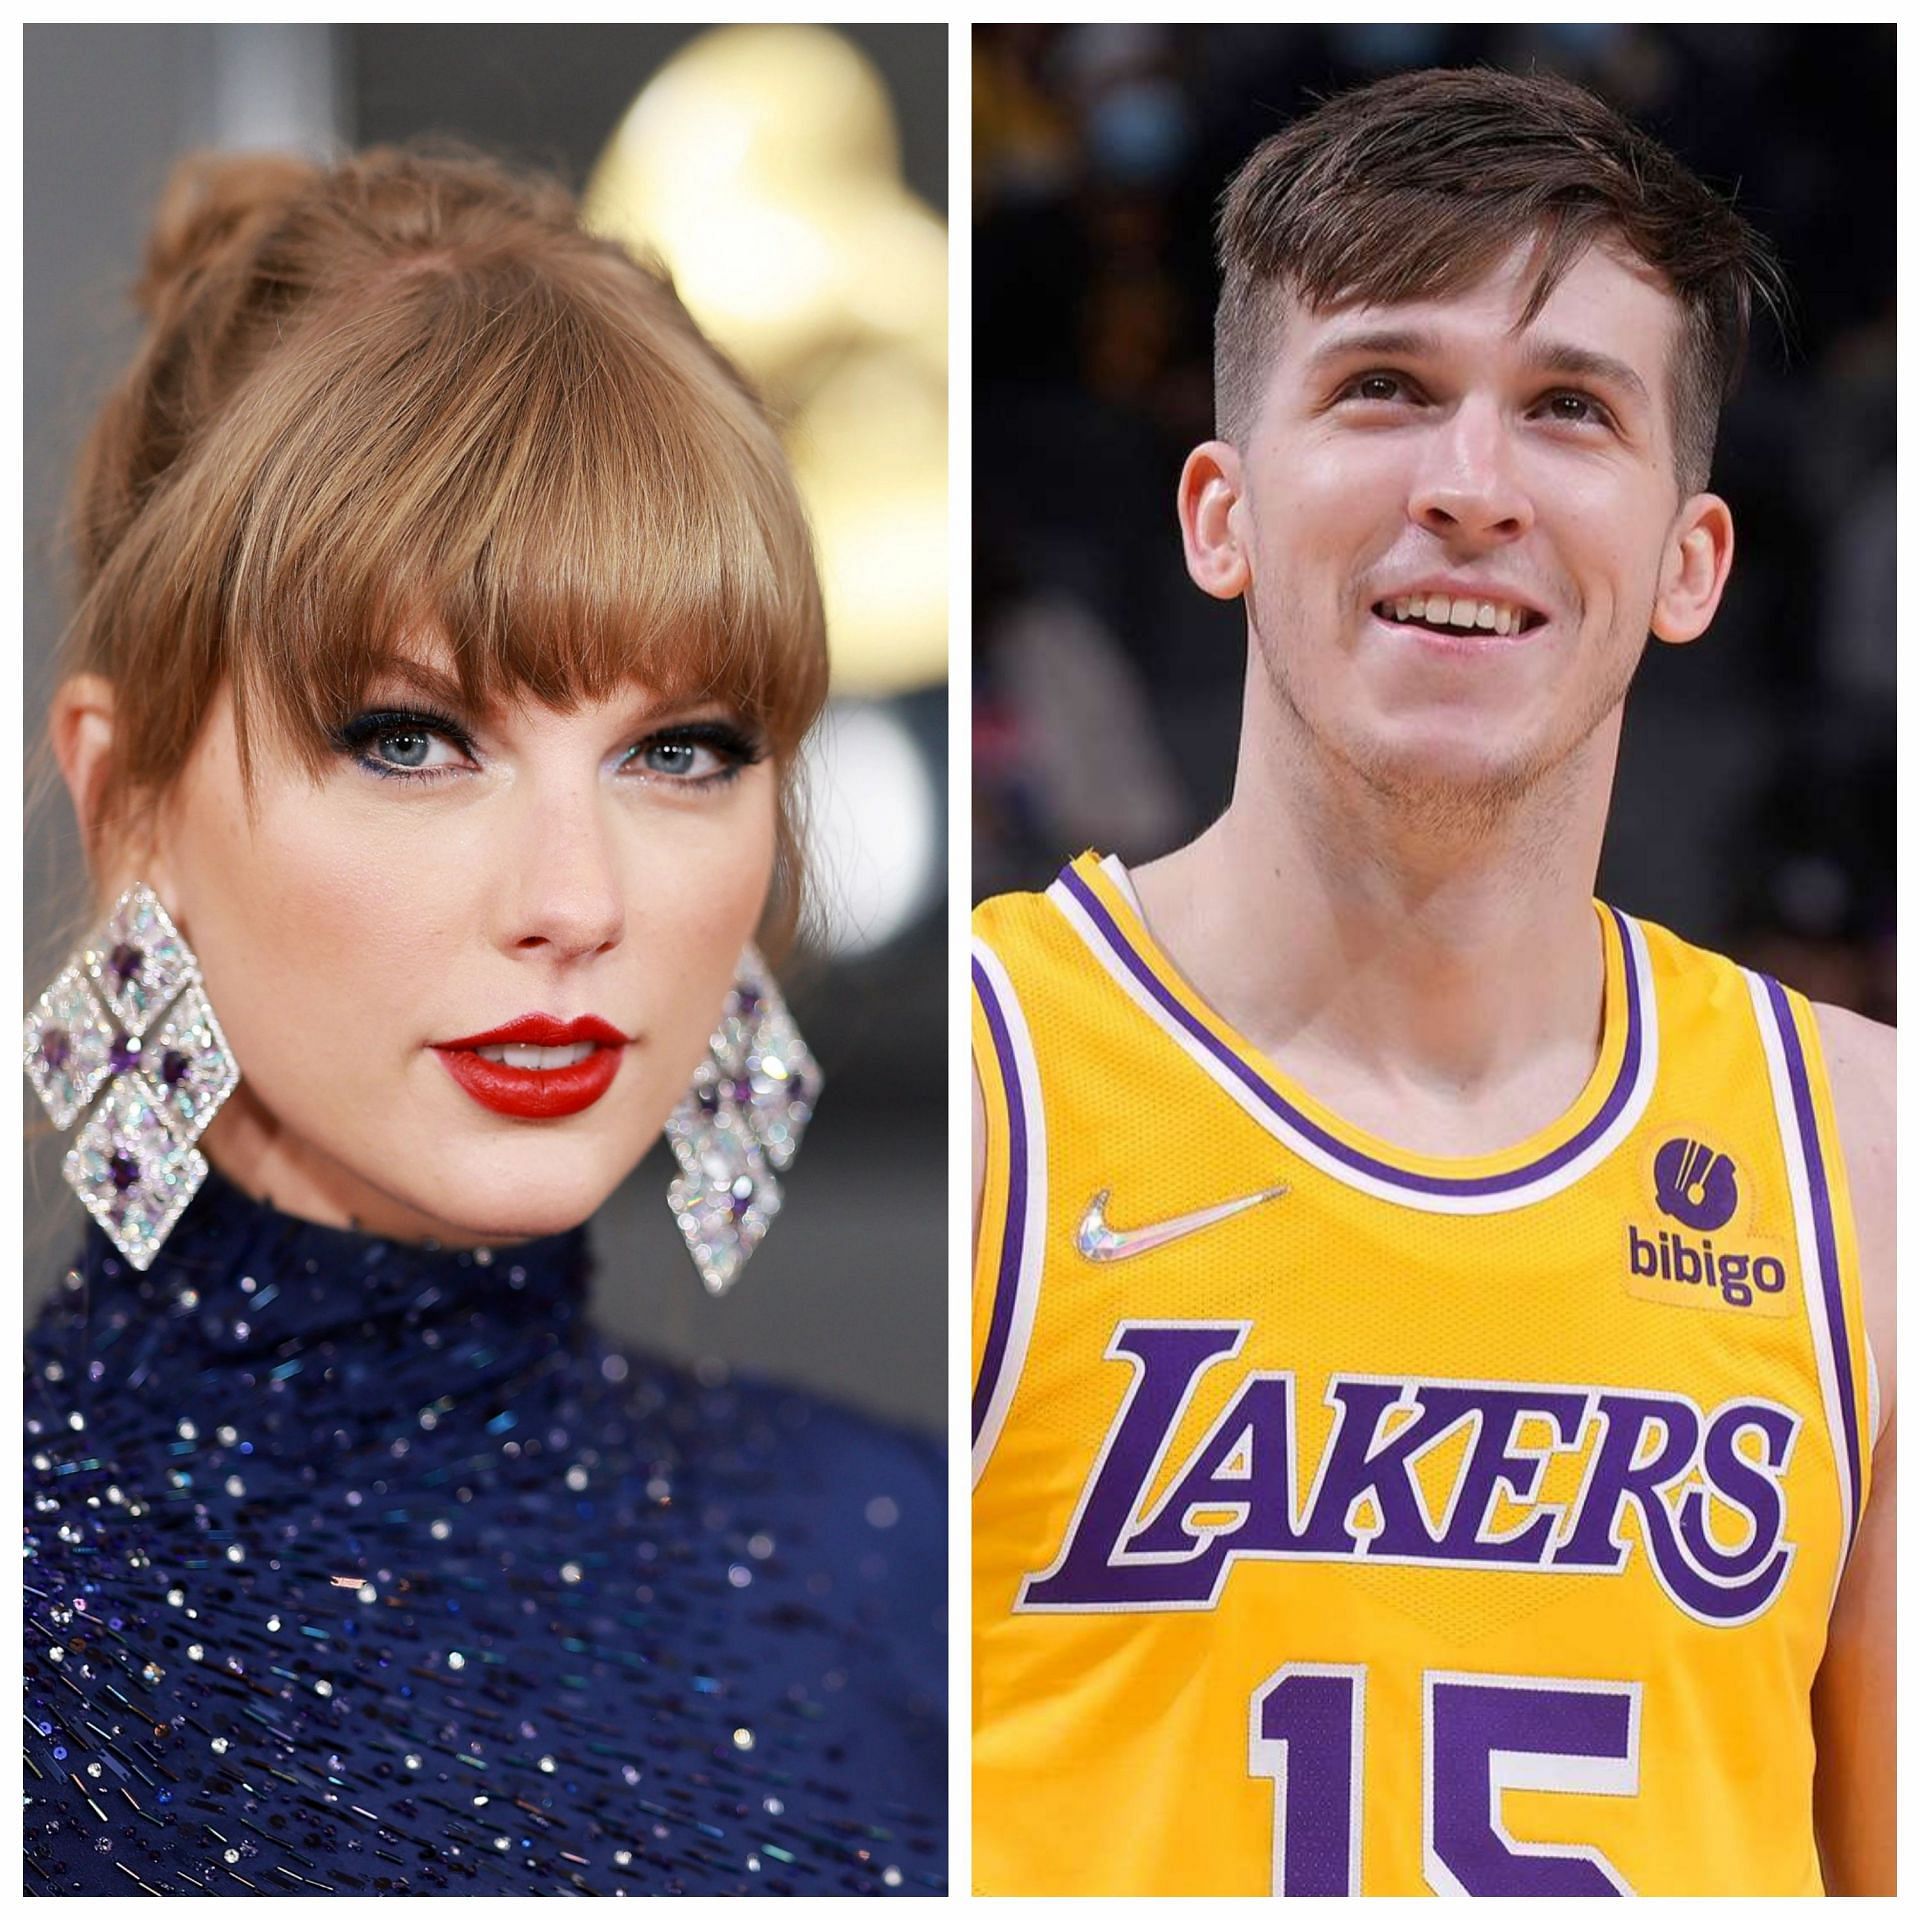 Clippers employee confirms spreading false rumors about Taylor Swift, Lakers&rsquo; $56 million star Austin Reaves